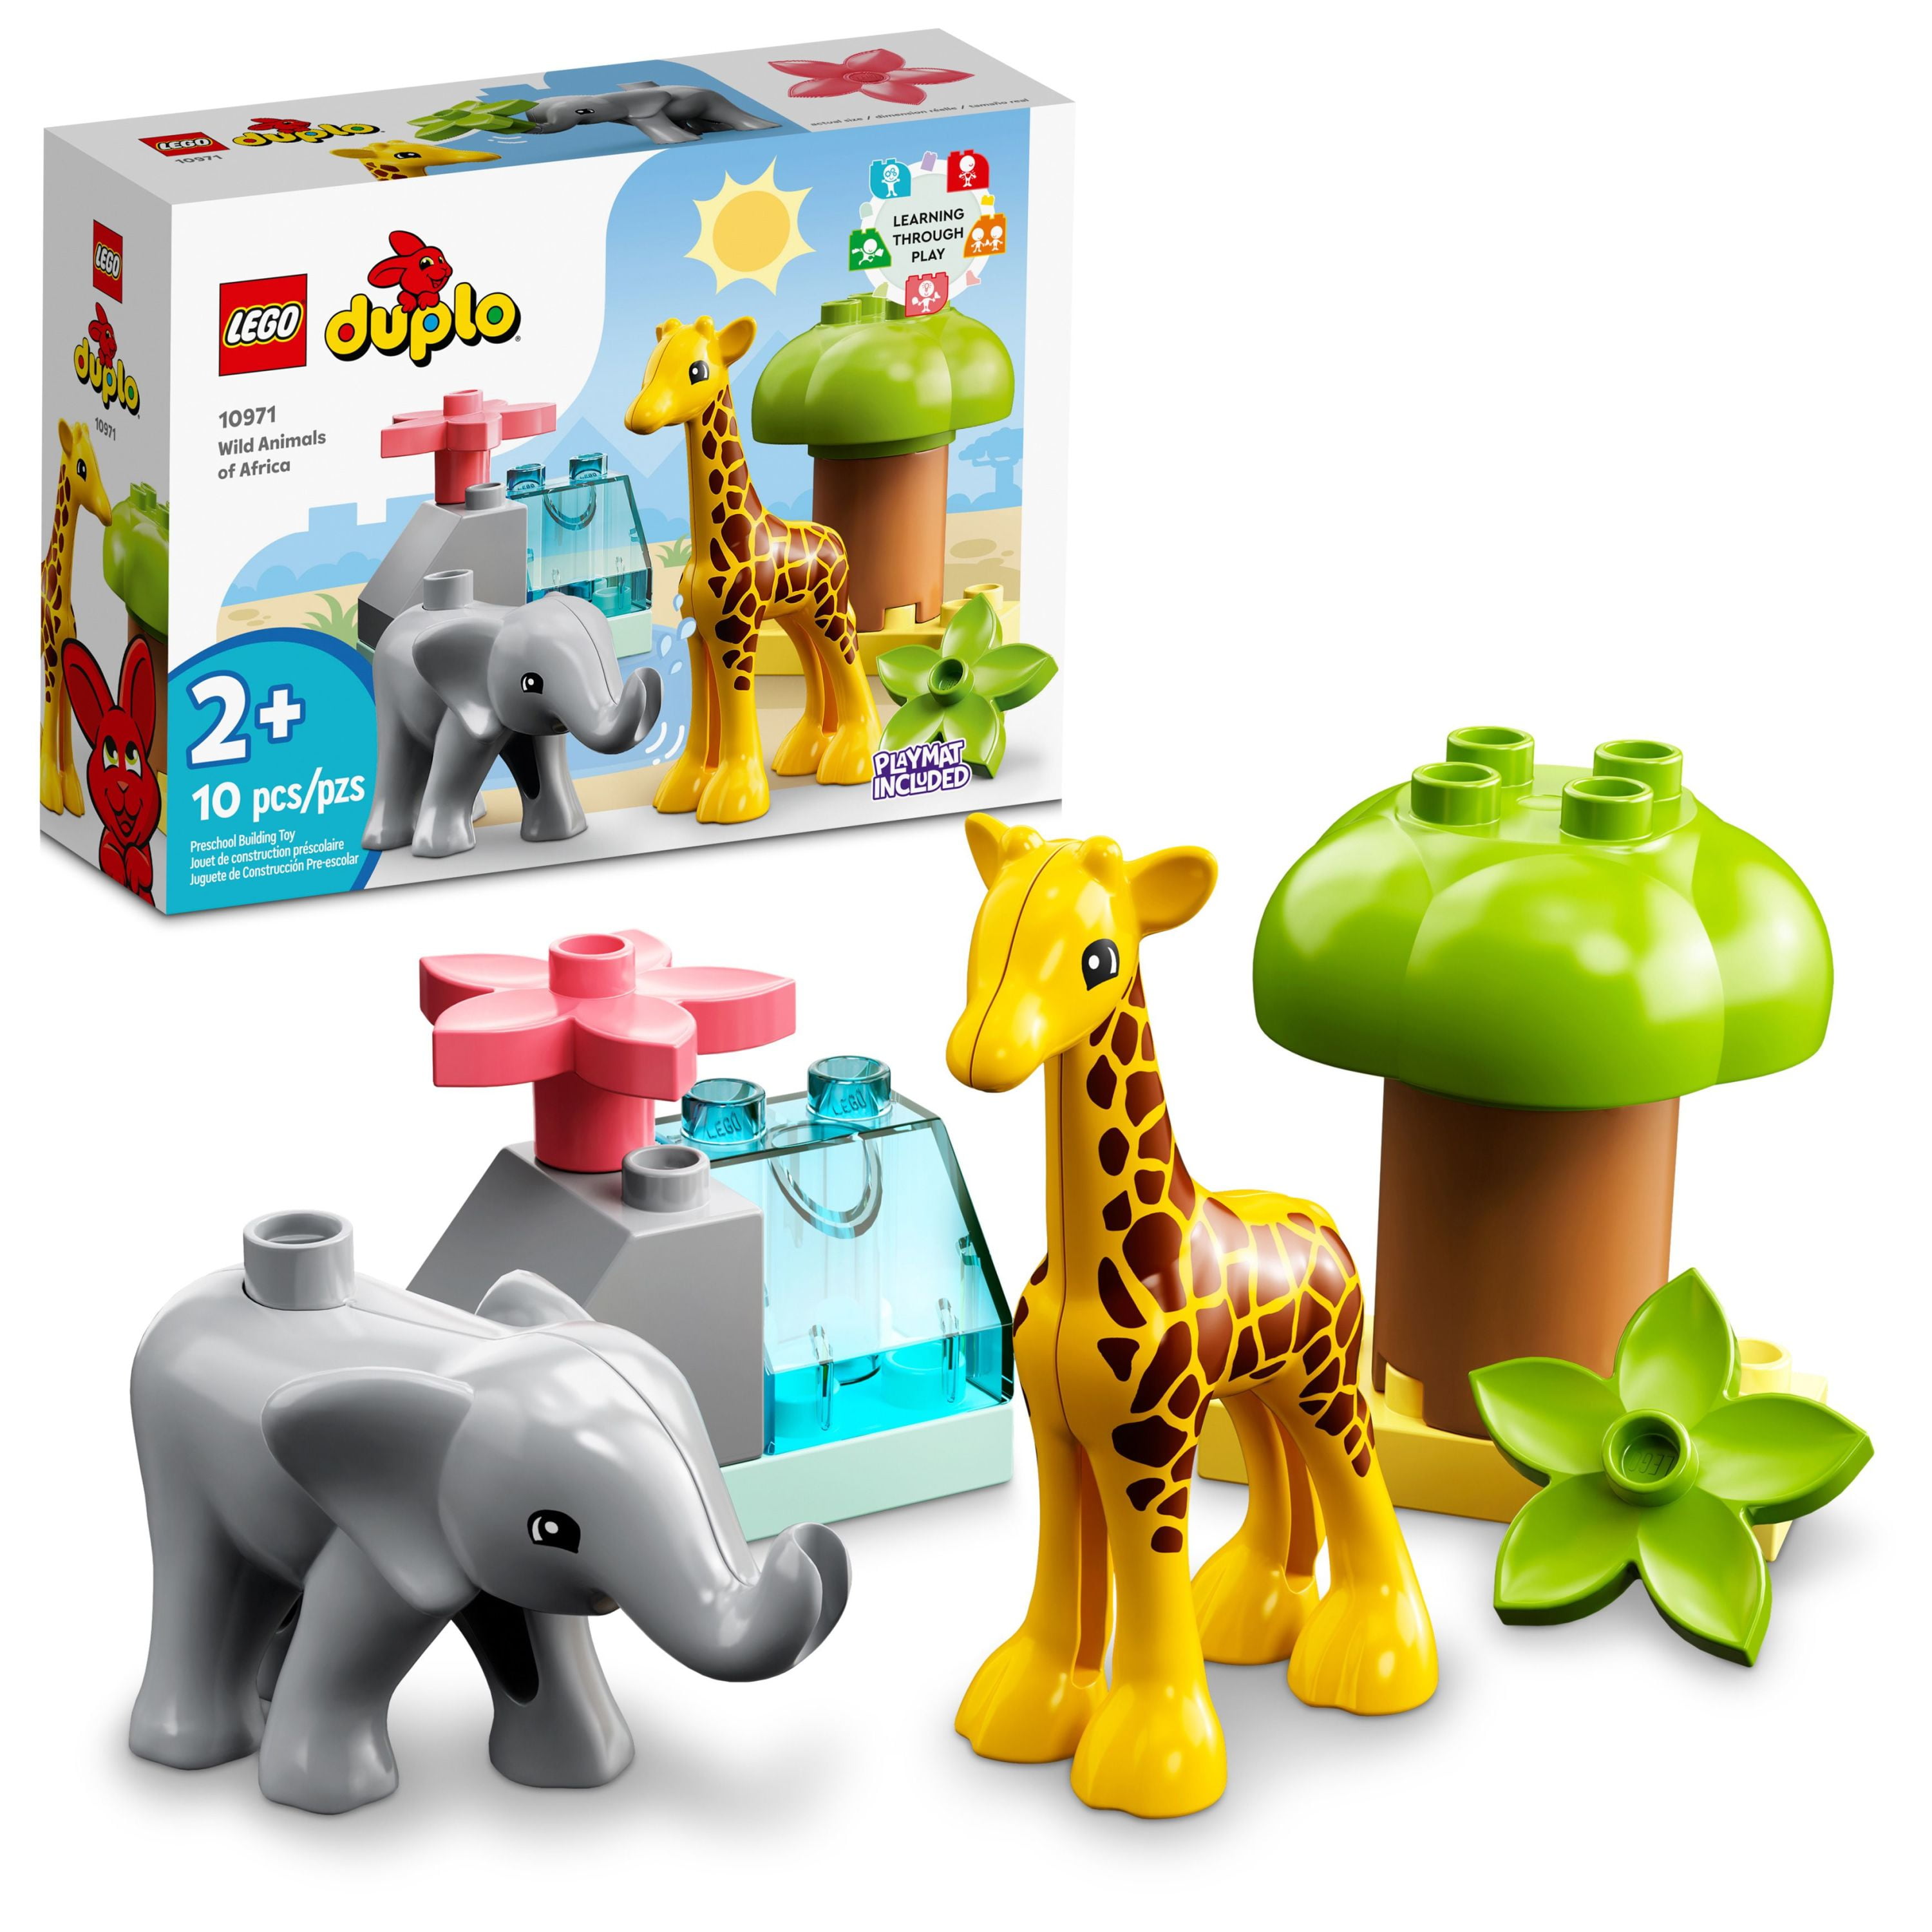 DUPLO Wild Animals of Africa 10971, Animal Toys for Toddlers, Girls & Boys Ages 2 Plus old, Toy with Baby Elephant & Giraffe Figures - Walmart.com